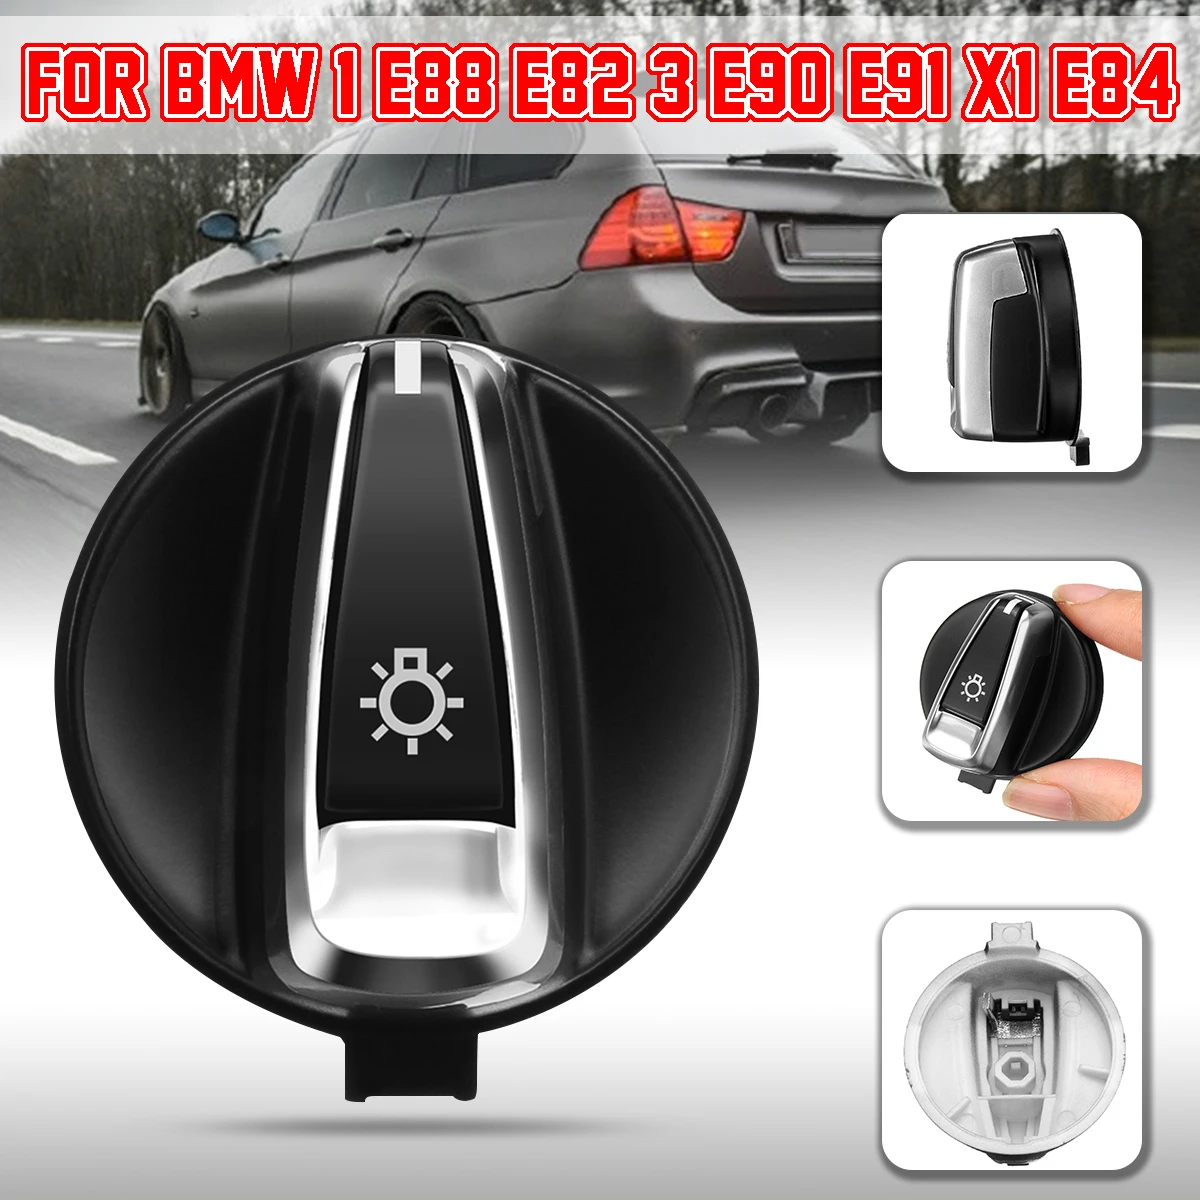 New Car Front Headlight Switch Rotation Button For BMW 1 E88 E82 3 